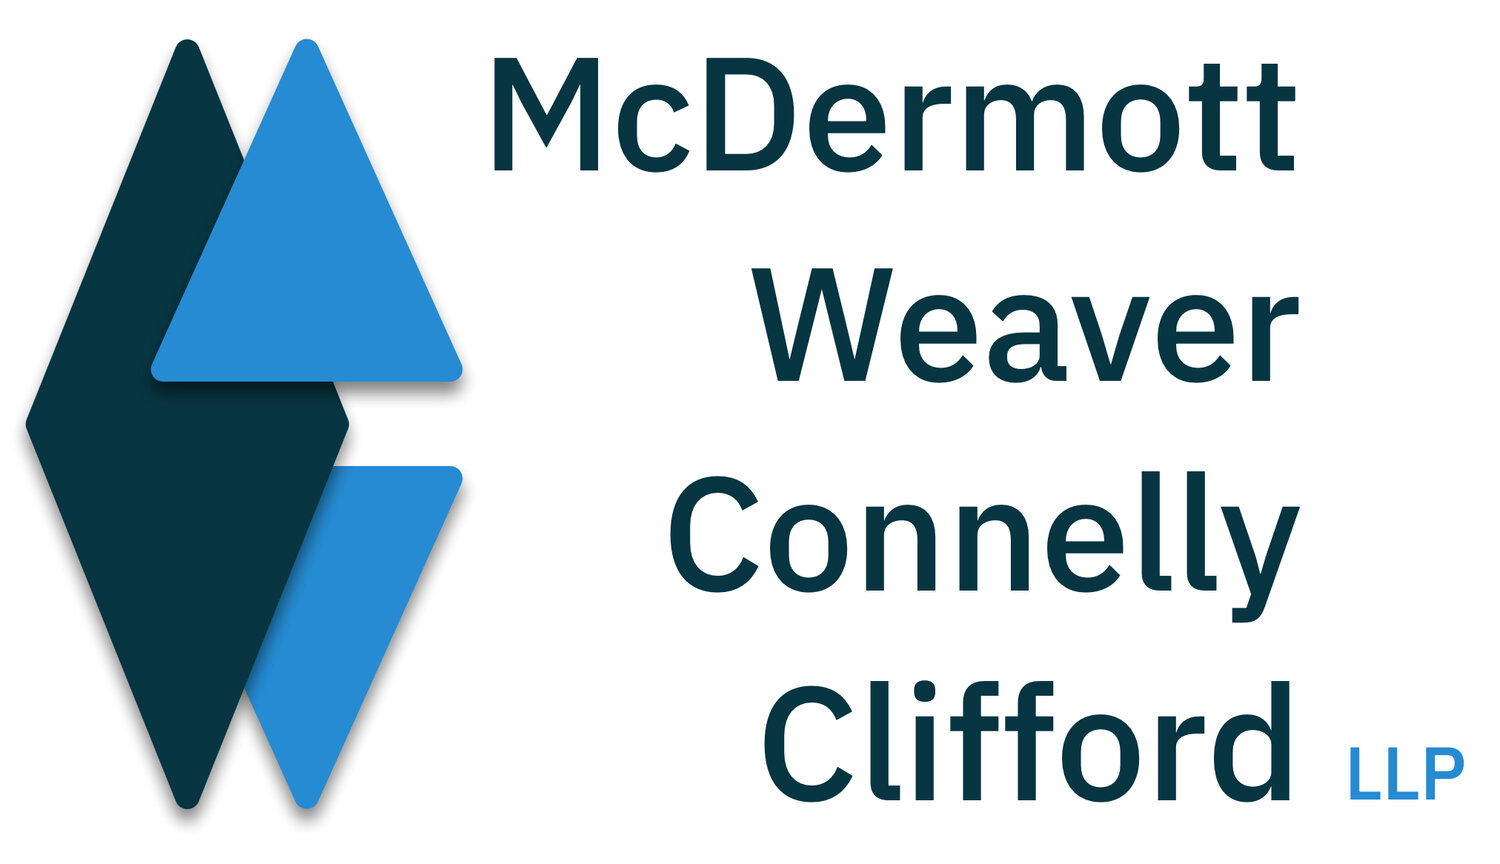 McDermott Weaver Connelly Clifford LLP